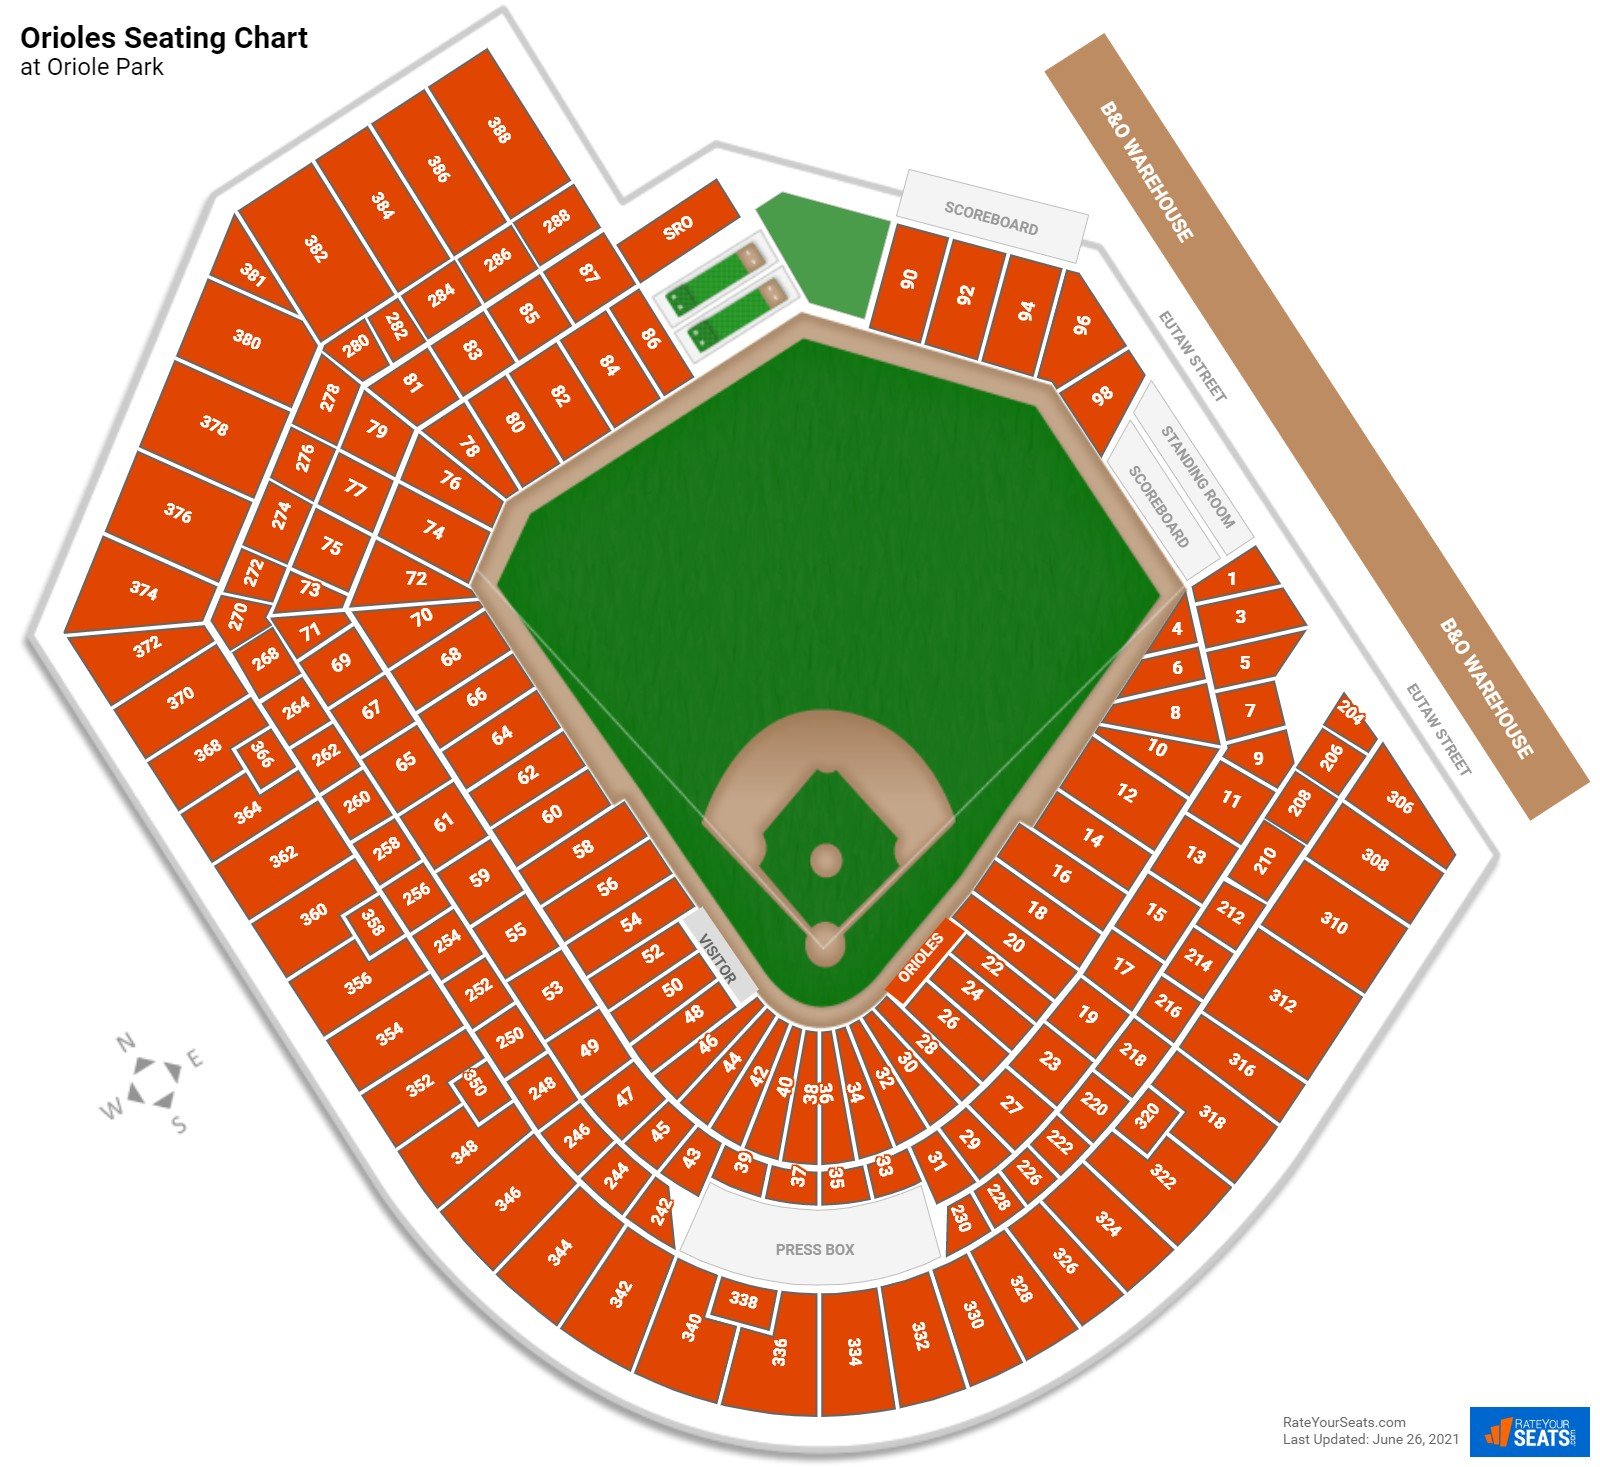 Orioles Seating Chart At Oriole Park 